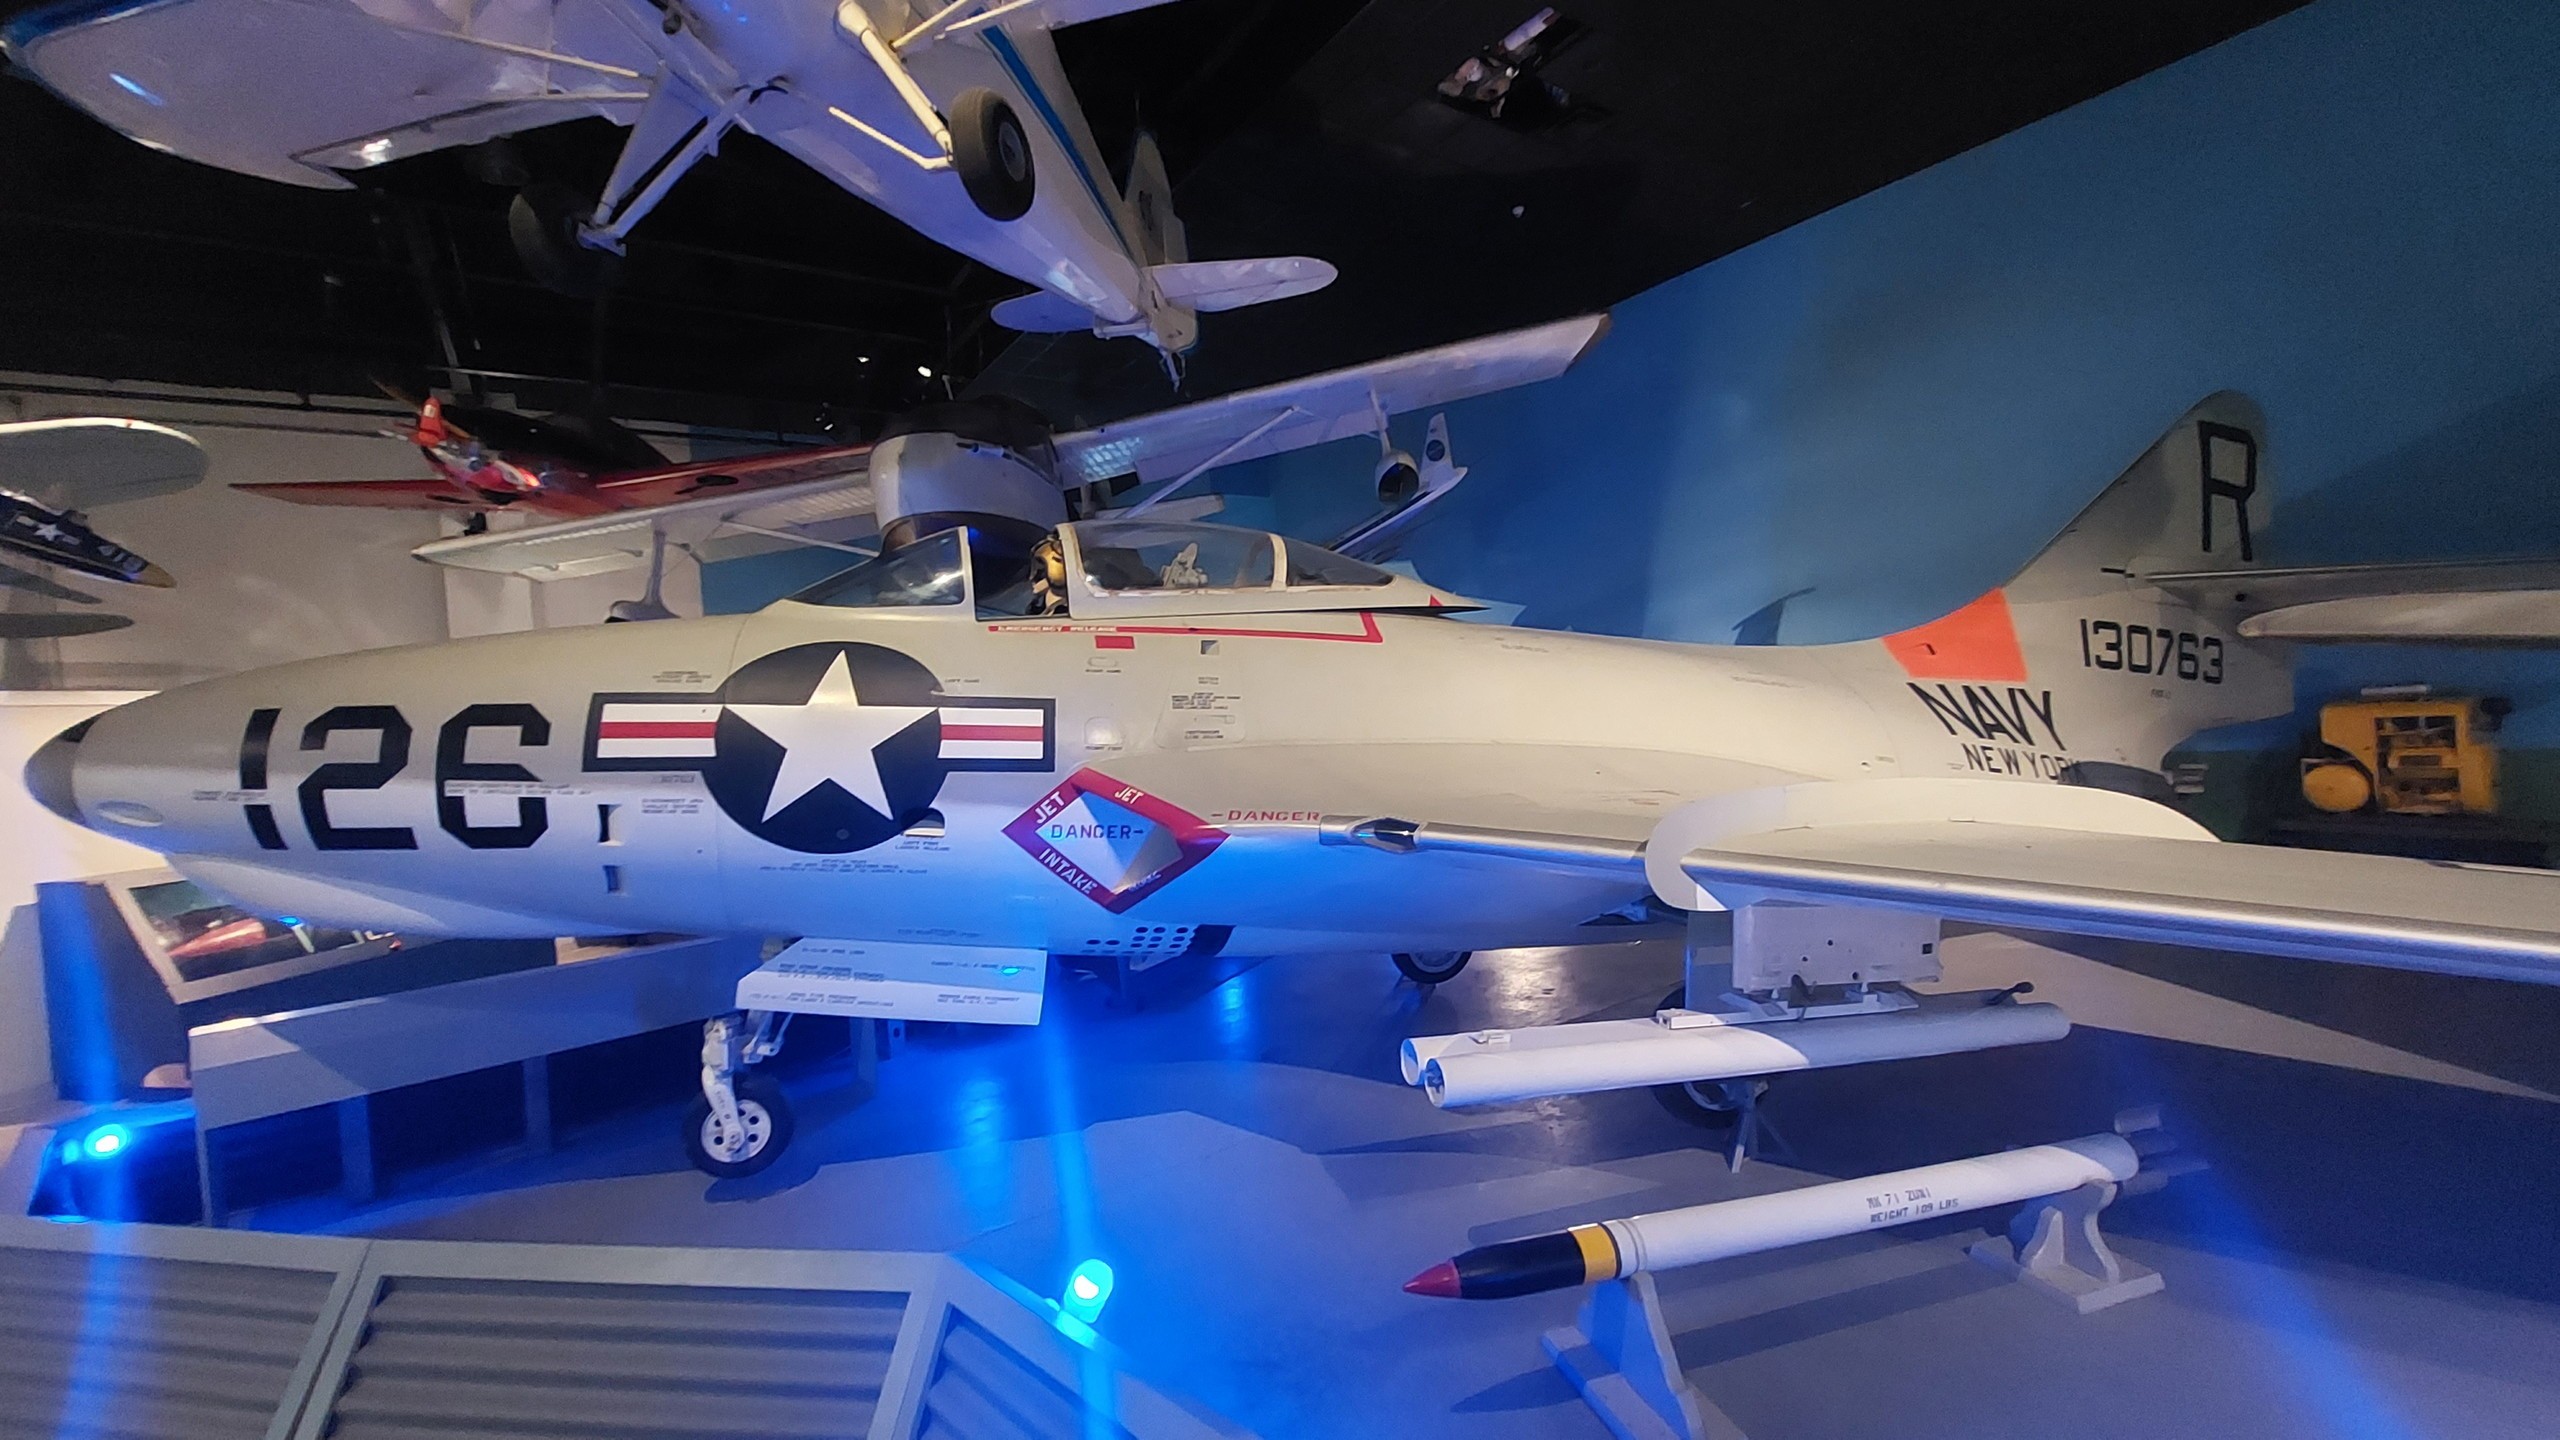 A U.S. Navy F9F Panther Has the First Recorded Jet-On-Jet